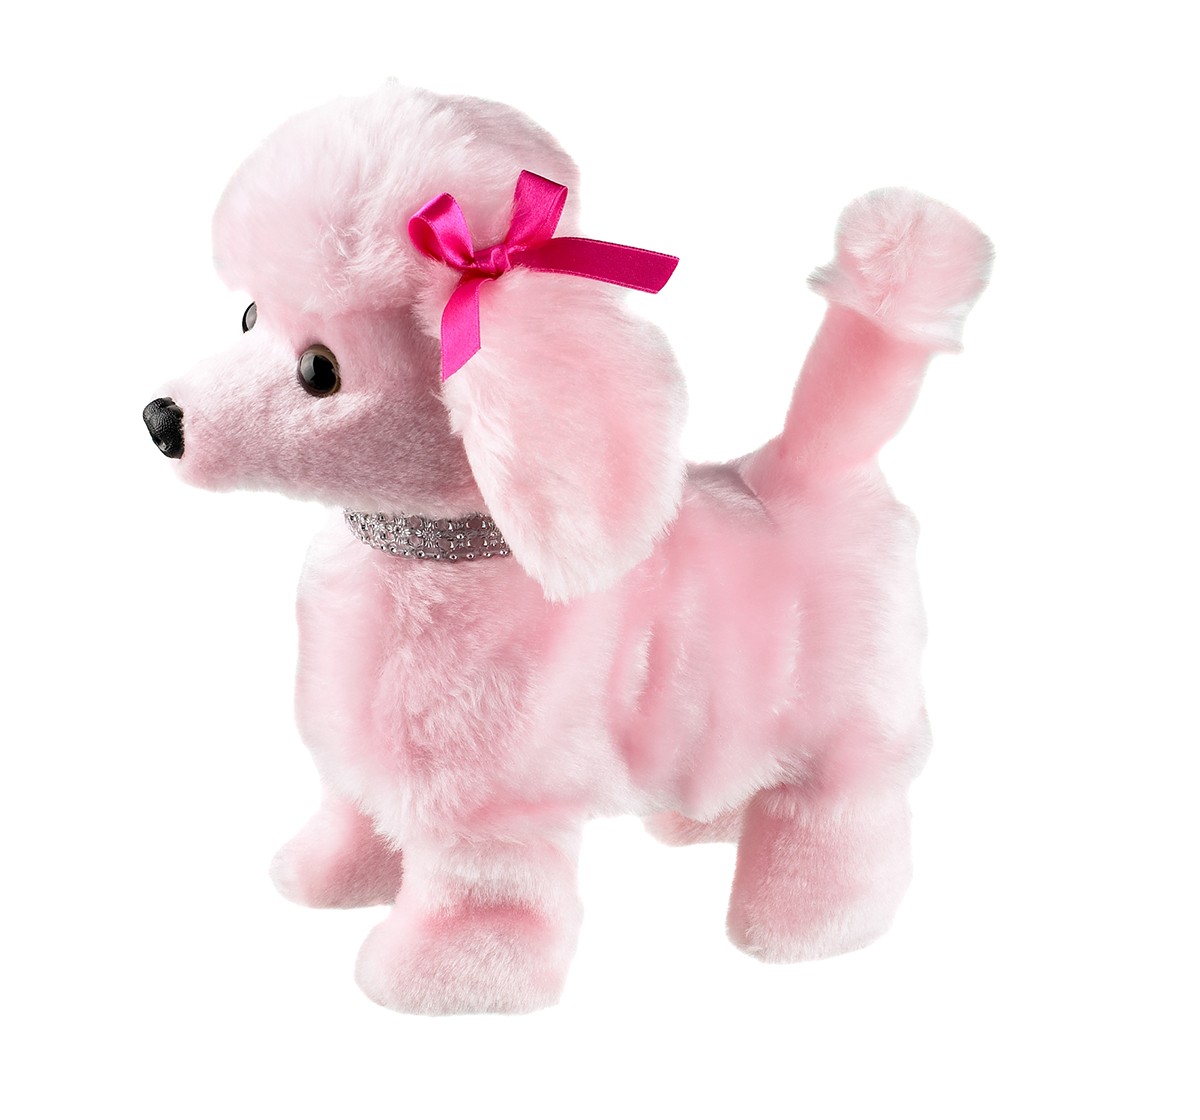  Hamleys Movers & Shakers - Pink Poodle Interactive Soft Toys for Kids age 2Y+ - 5 Cm (Pink)